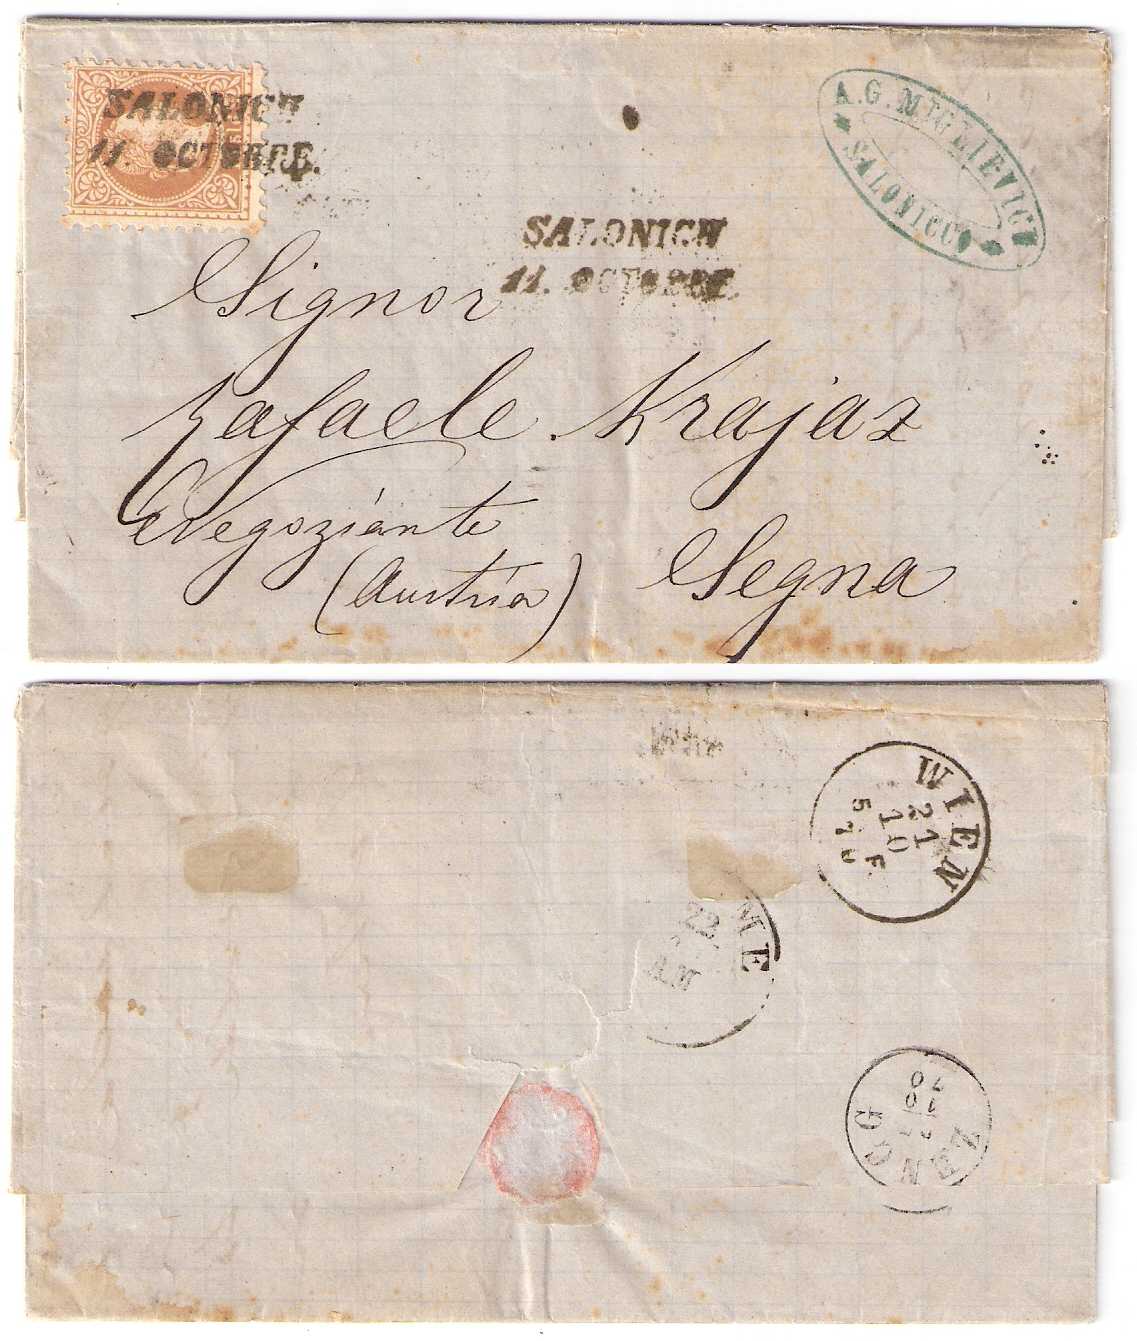 15.8.1883 Austrian Post Offices in the Ottoman Empire Smyrna 1.6.1872 Letter